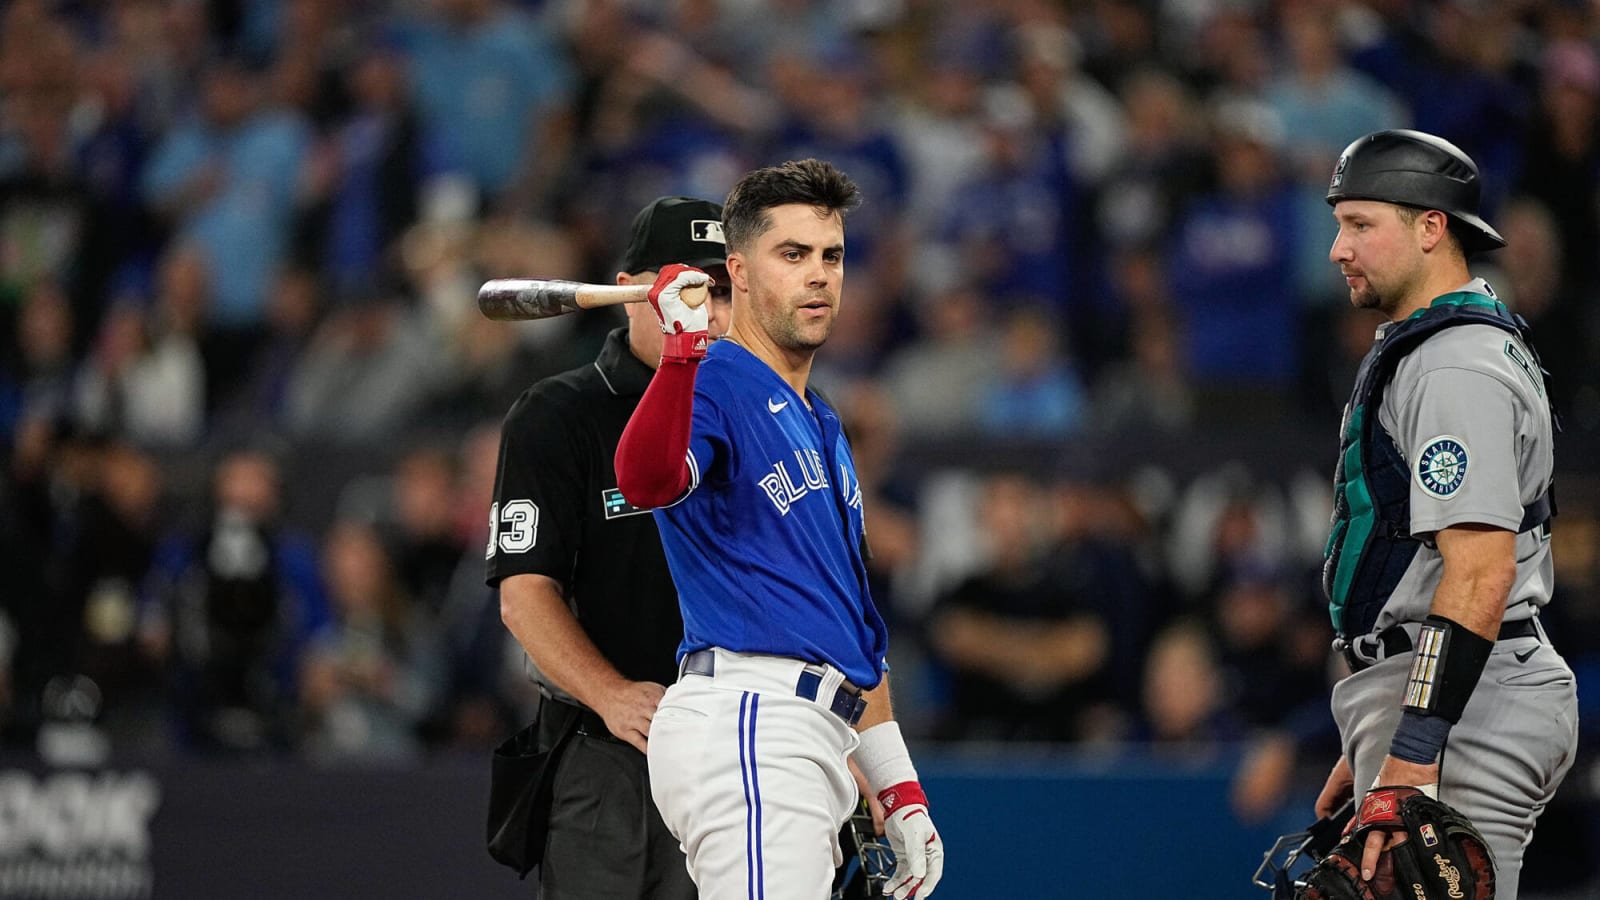 Whit Merrifield’s late-season success may be difficult to replicate in 2023